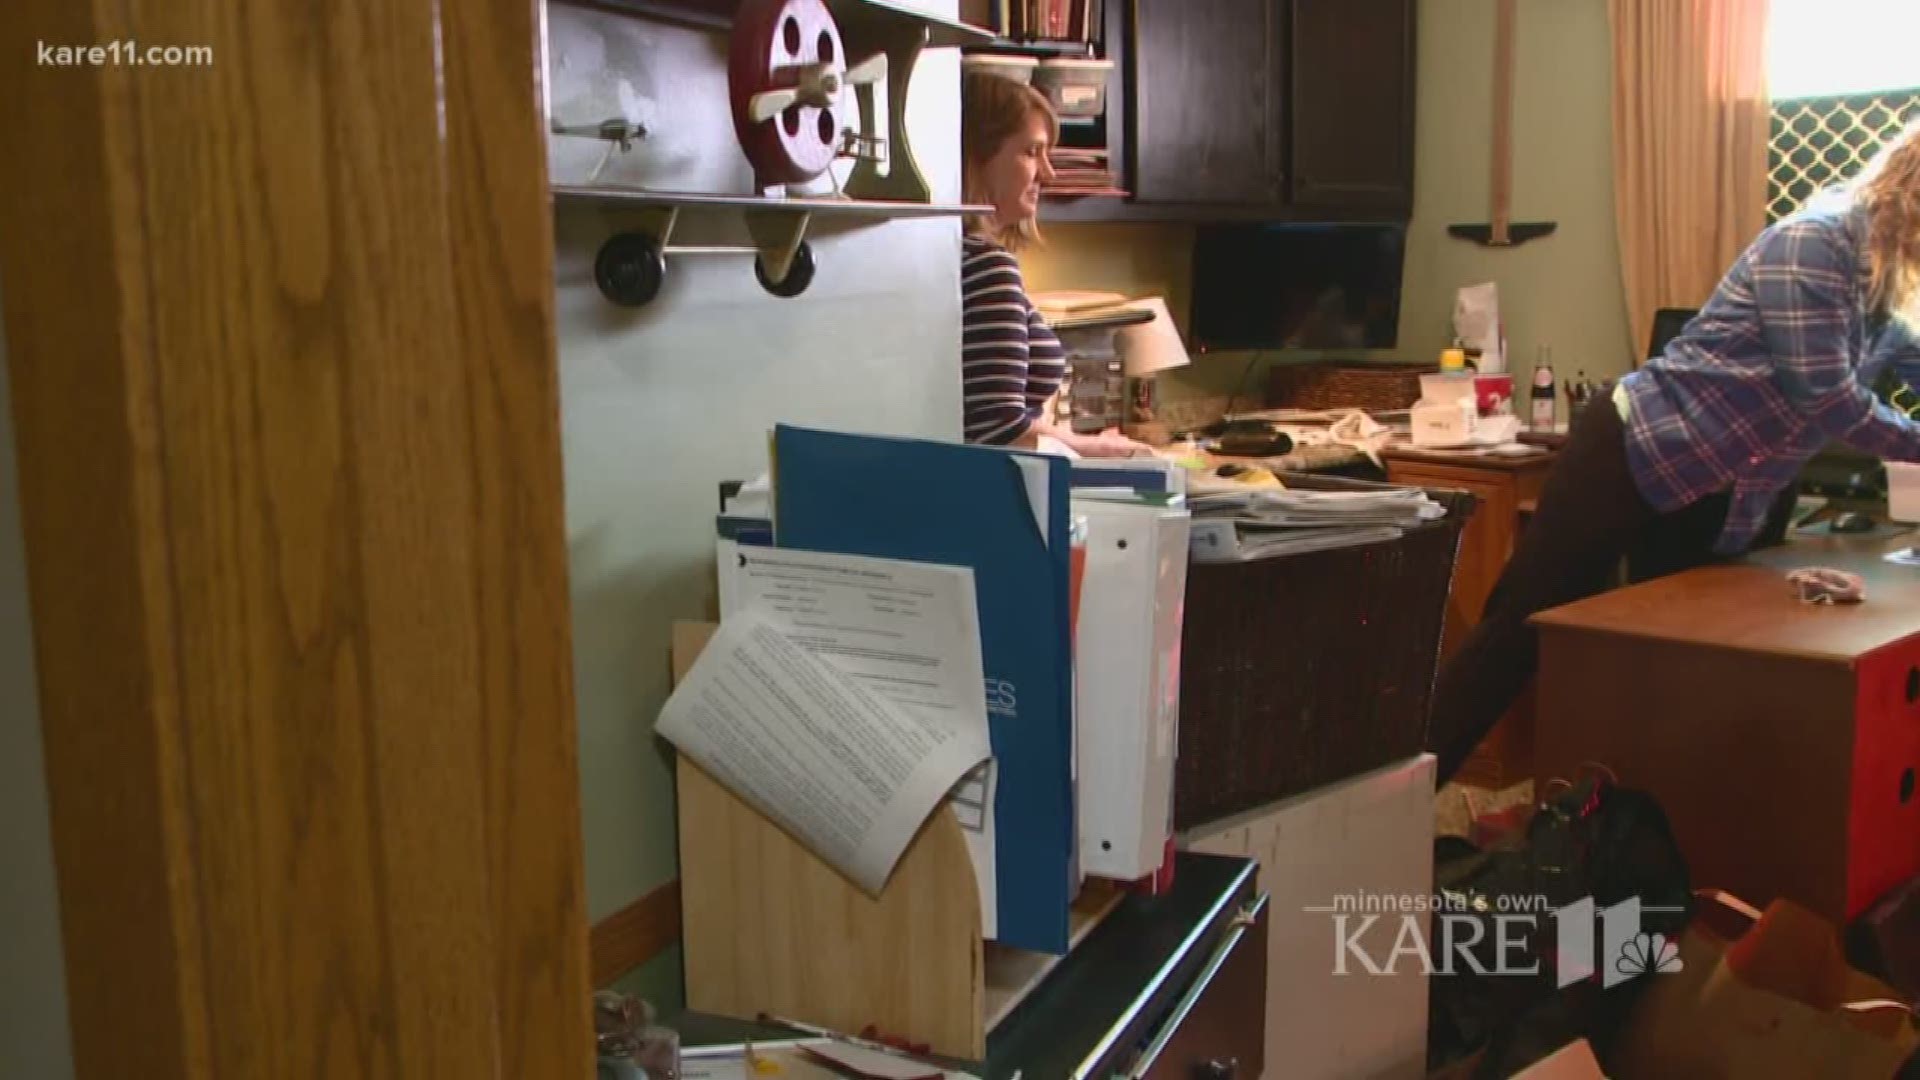 Decluttering expert Laurie Wrobel helps get rid of the clutter and piled up papers and stuff in a home office.